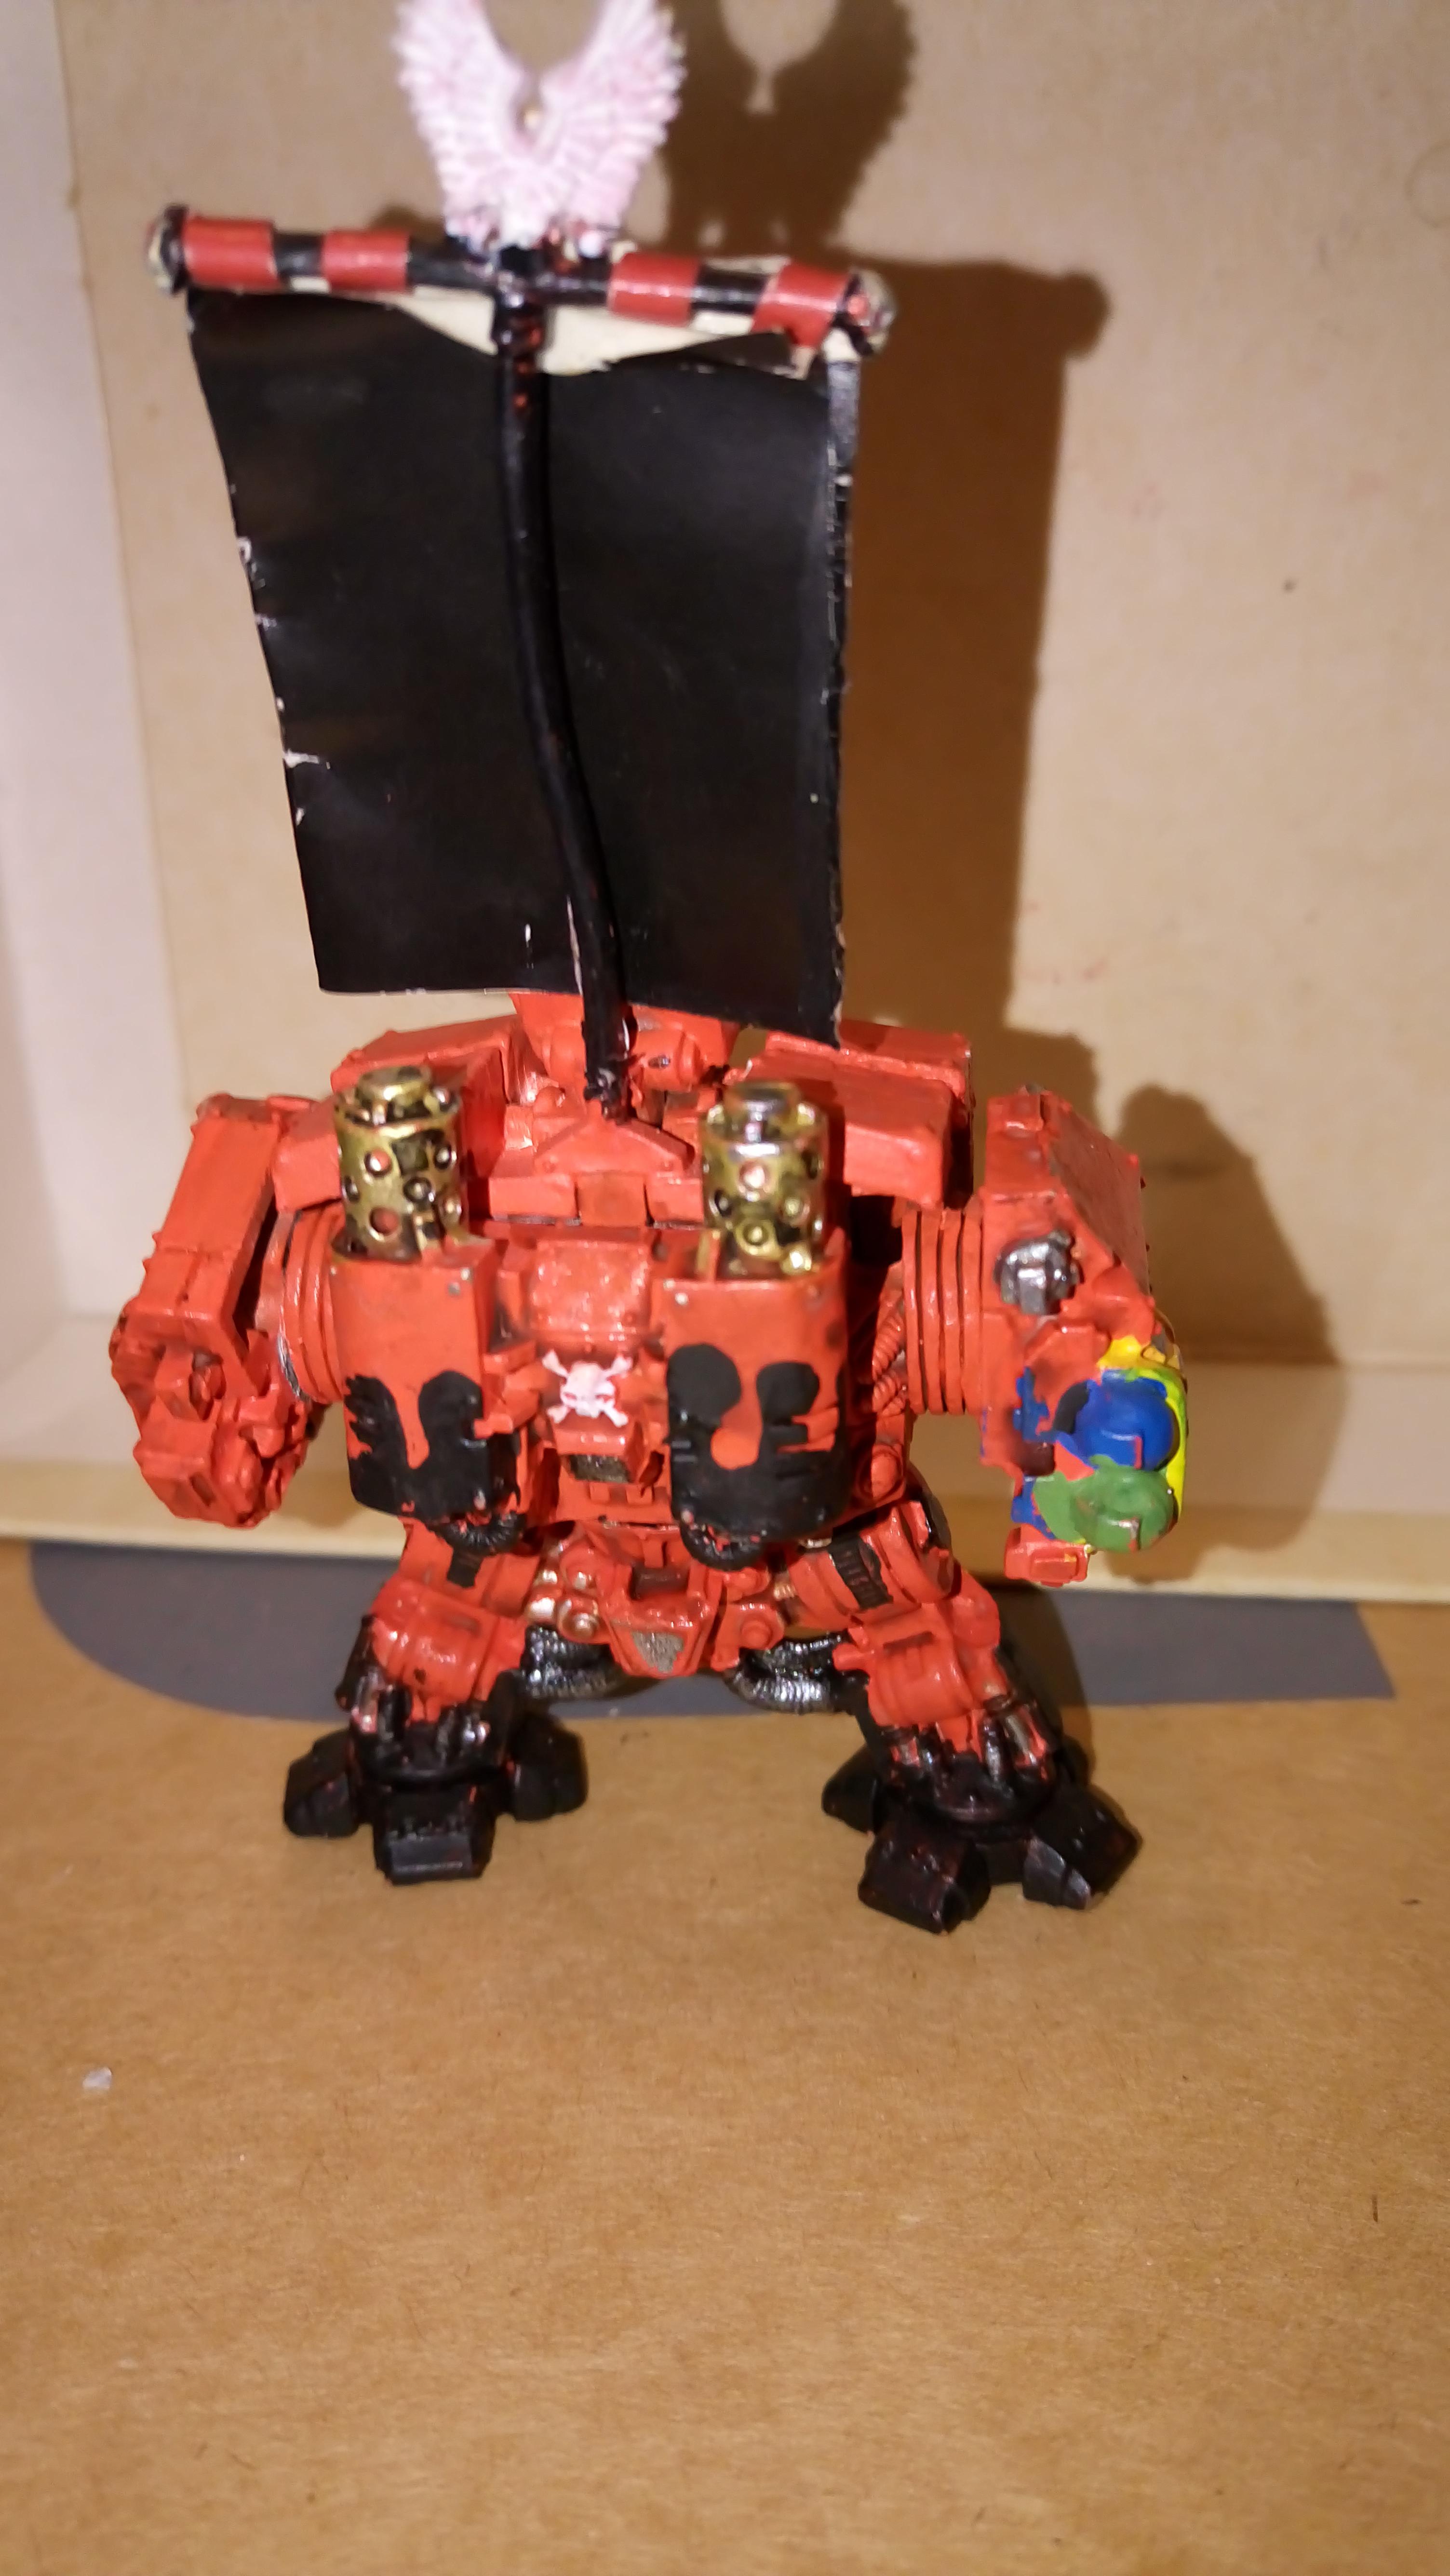 Blood Angels, Dreadnought, Imperium, Space Marines, Warhammer 40,000